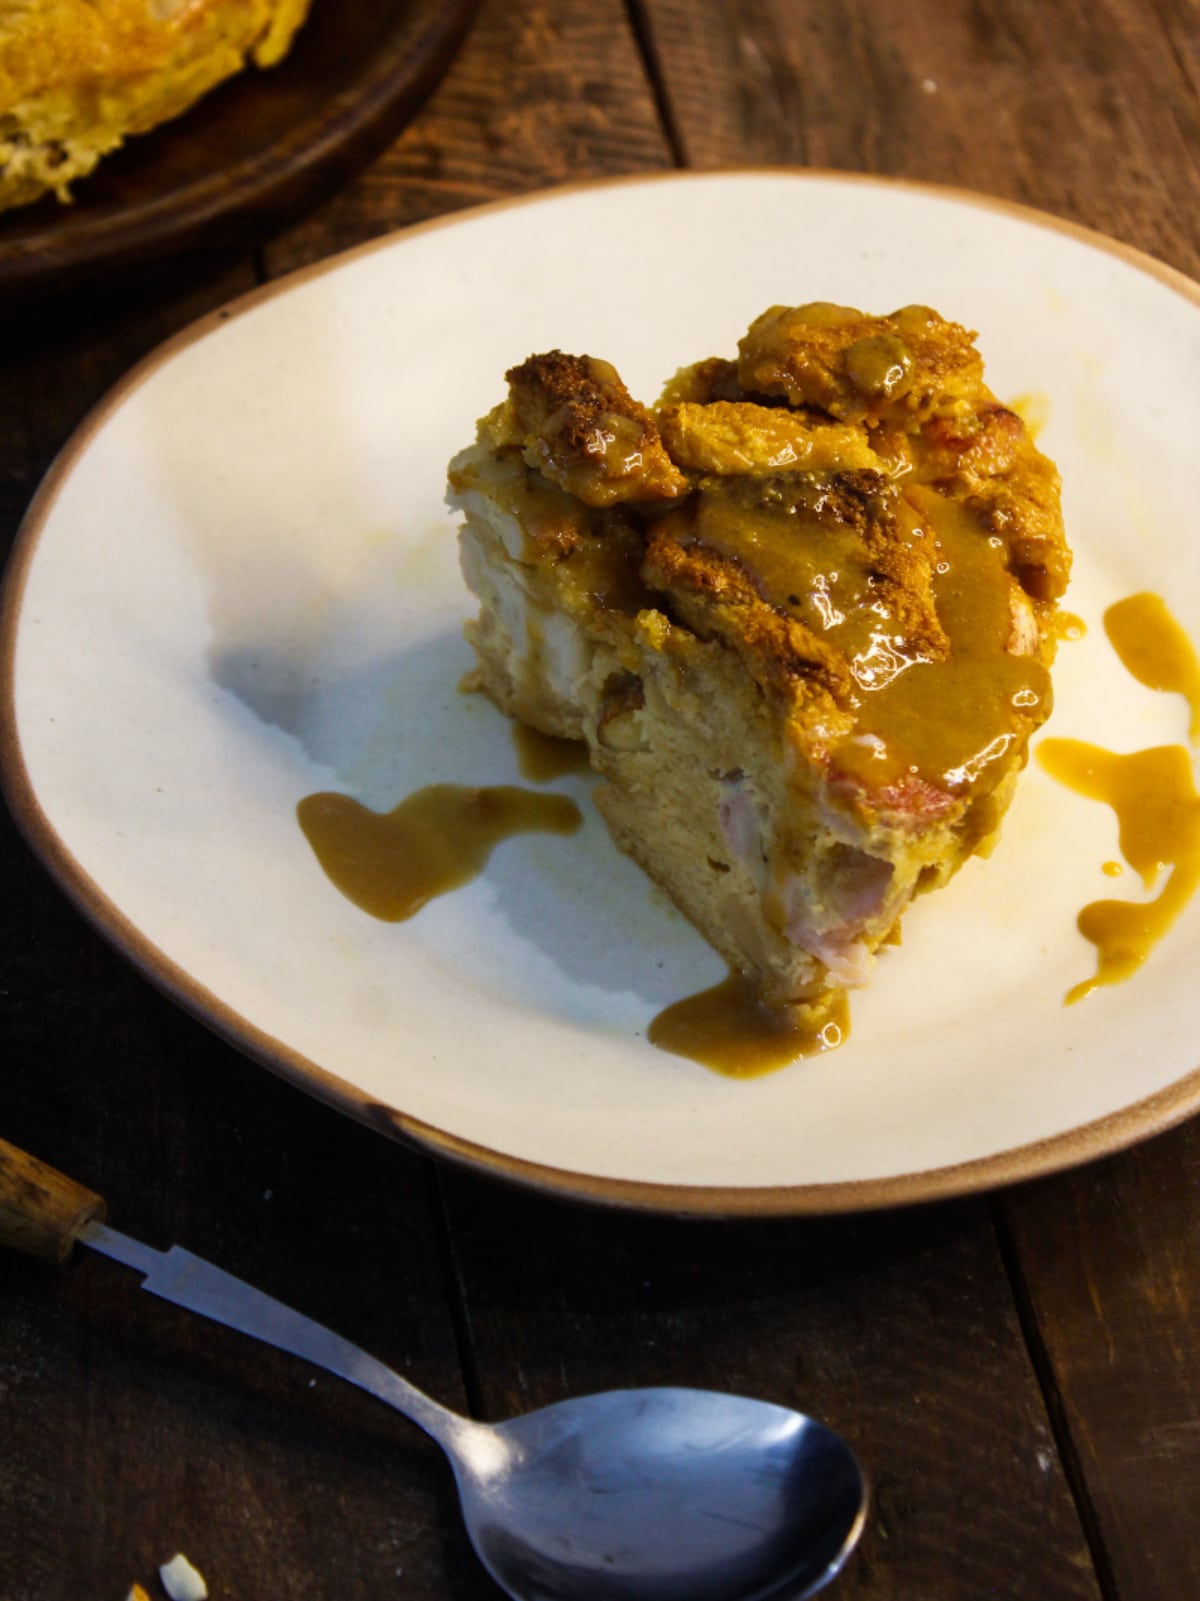 Easy Bread Pudding with Caramel Sauce served on a plate